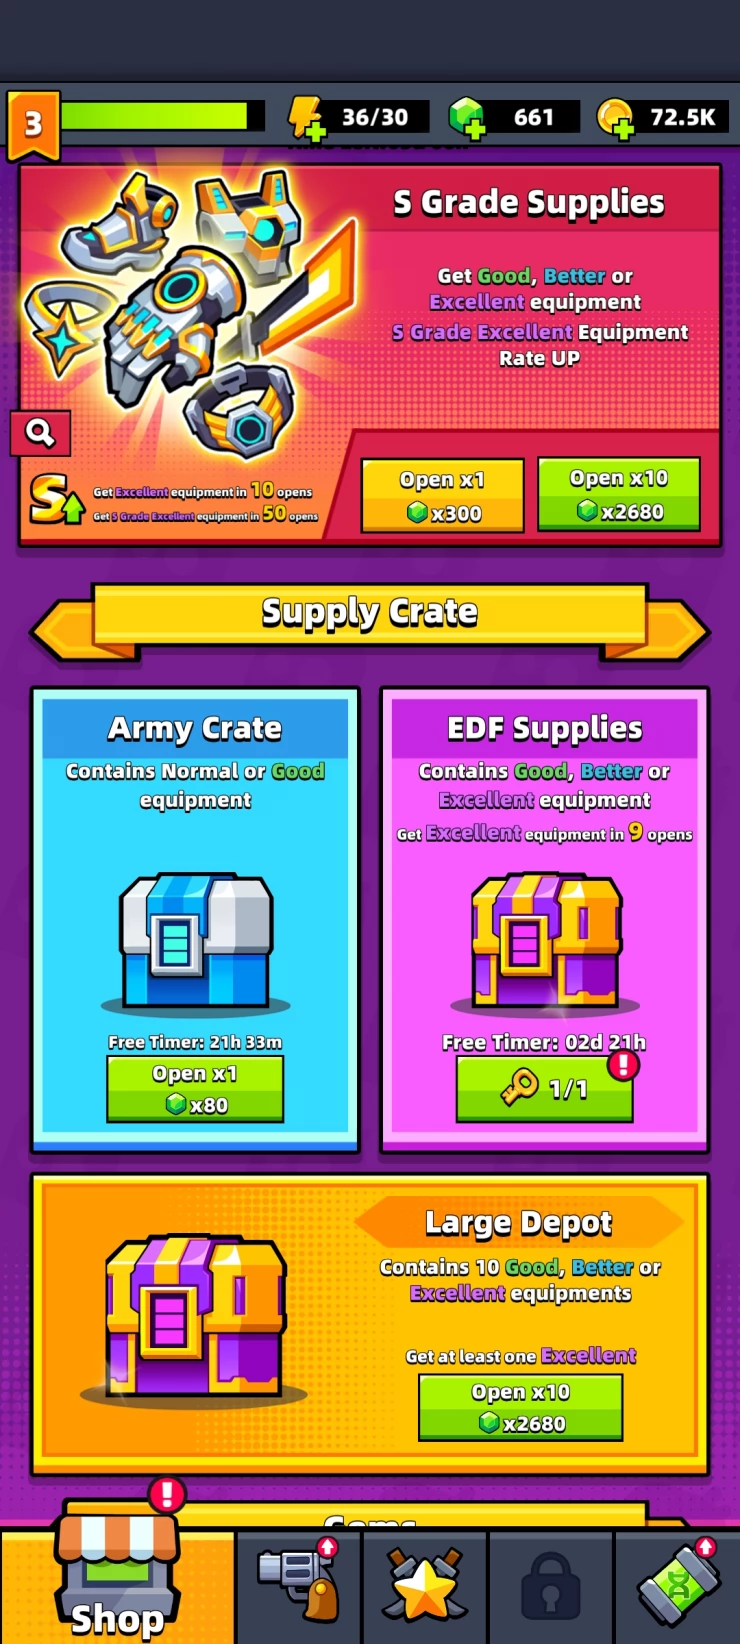 Equipment Chests in the Shop